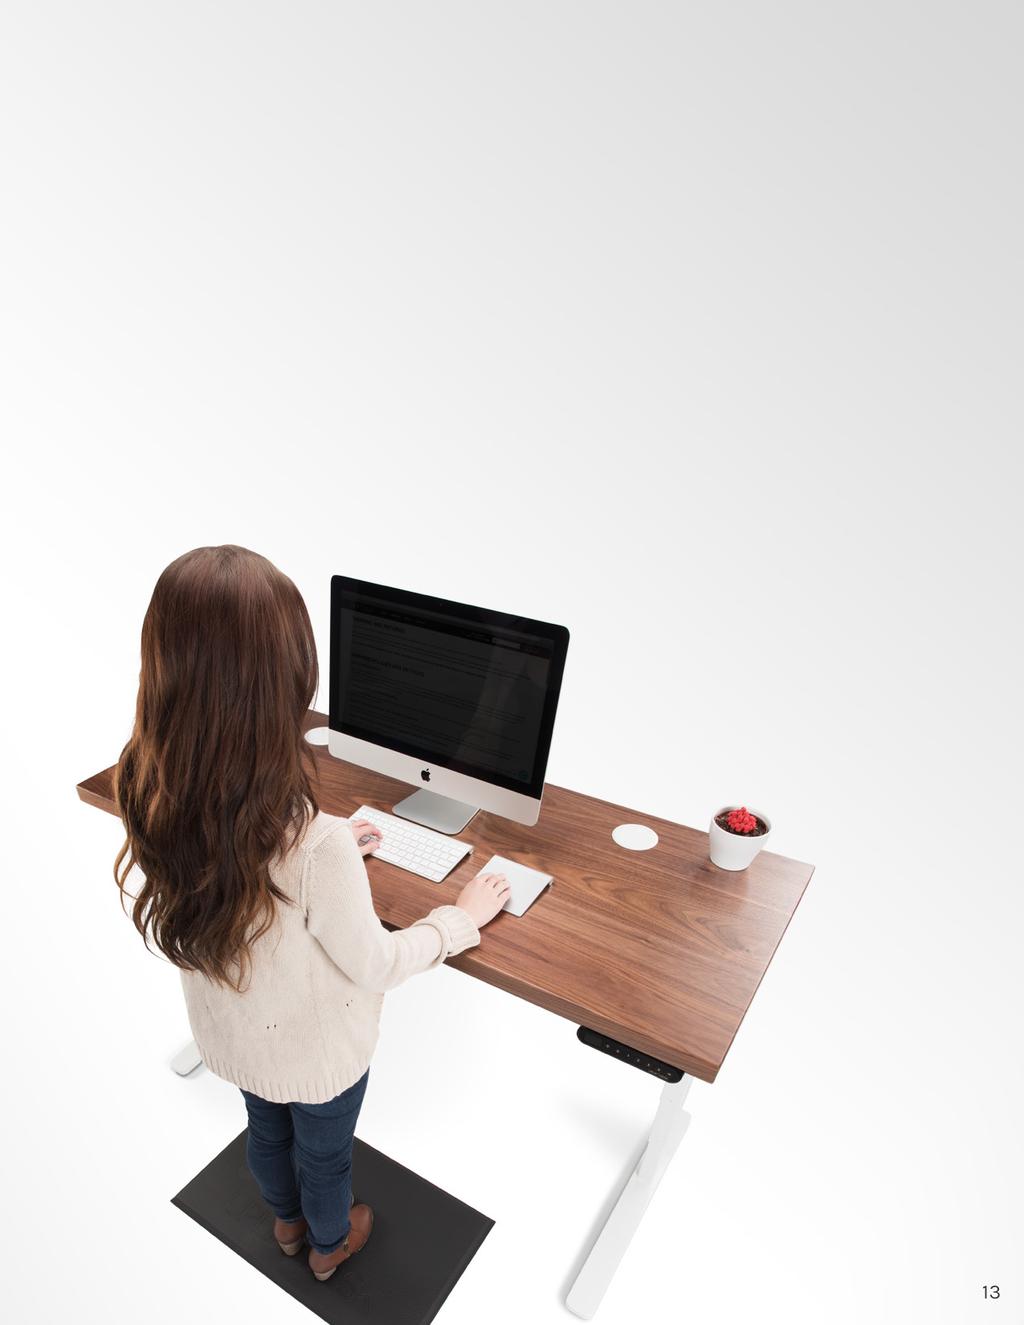 Treat Yourself Solid Wood If you re looking for the perfect accent to your office space-something you really want to brag about-we suggest looking at our luxurious solid wood desktops.